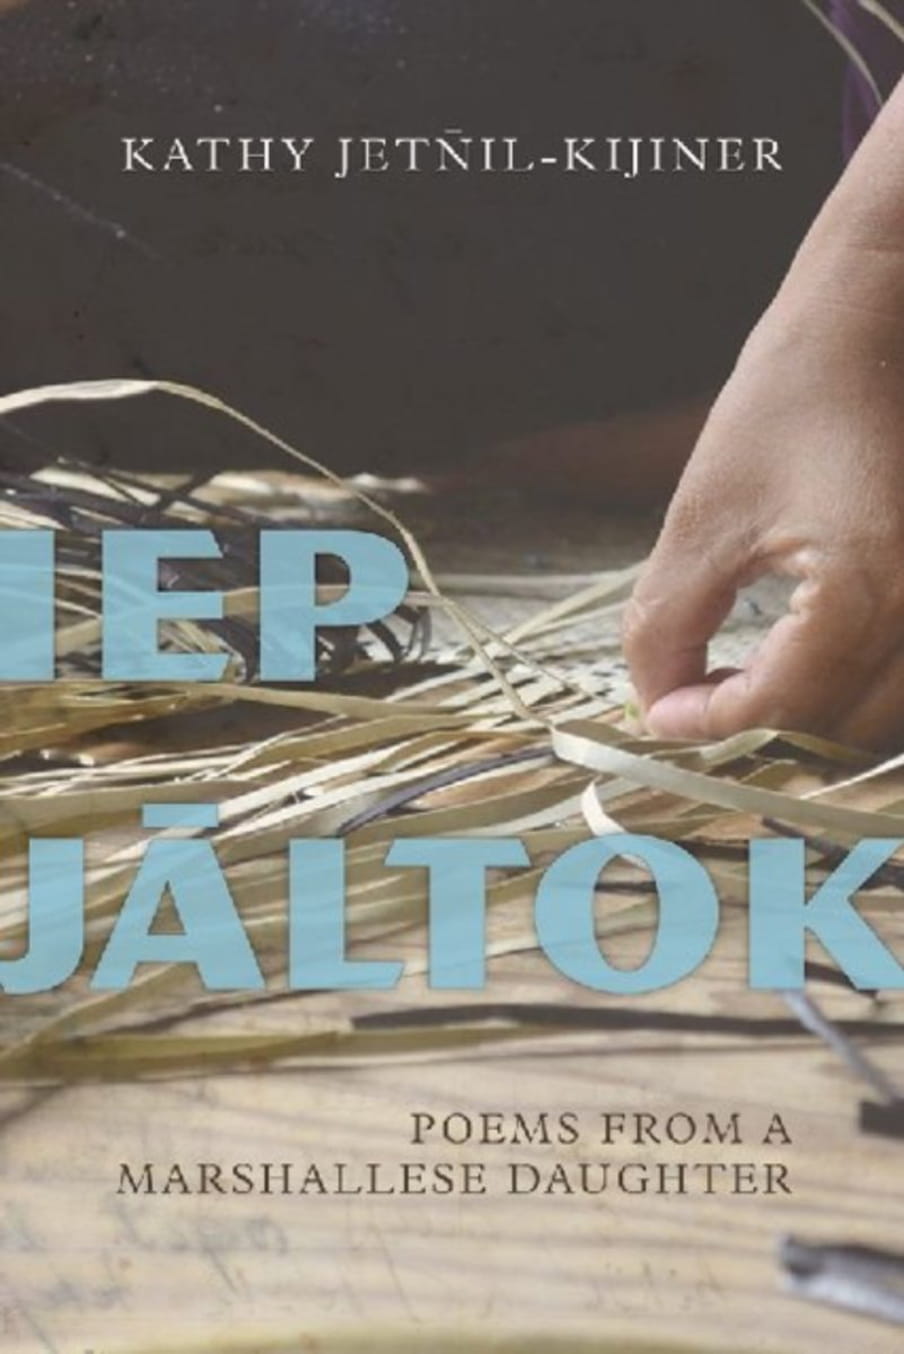 Book Cover of Iep Jaltok, depicting a hand weaving leaves